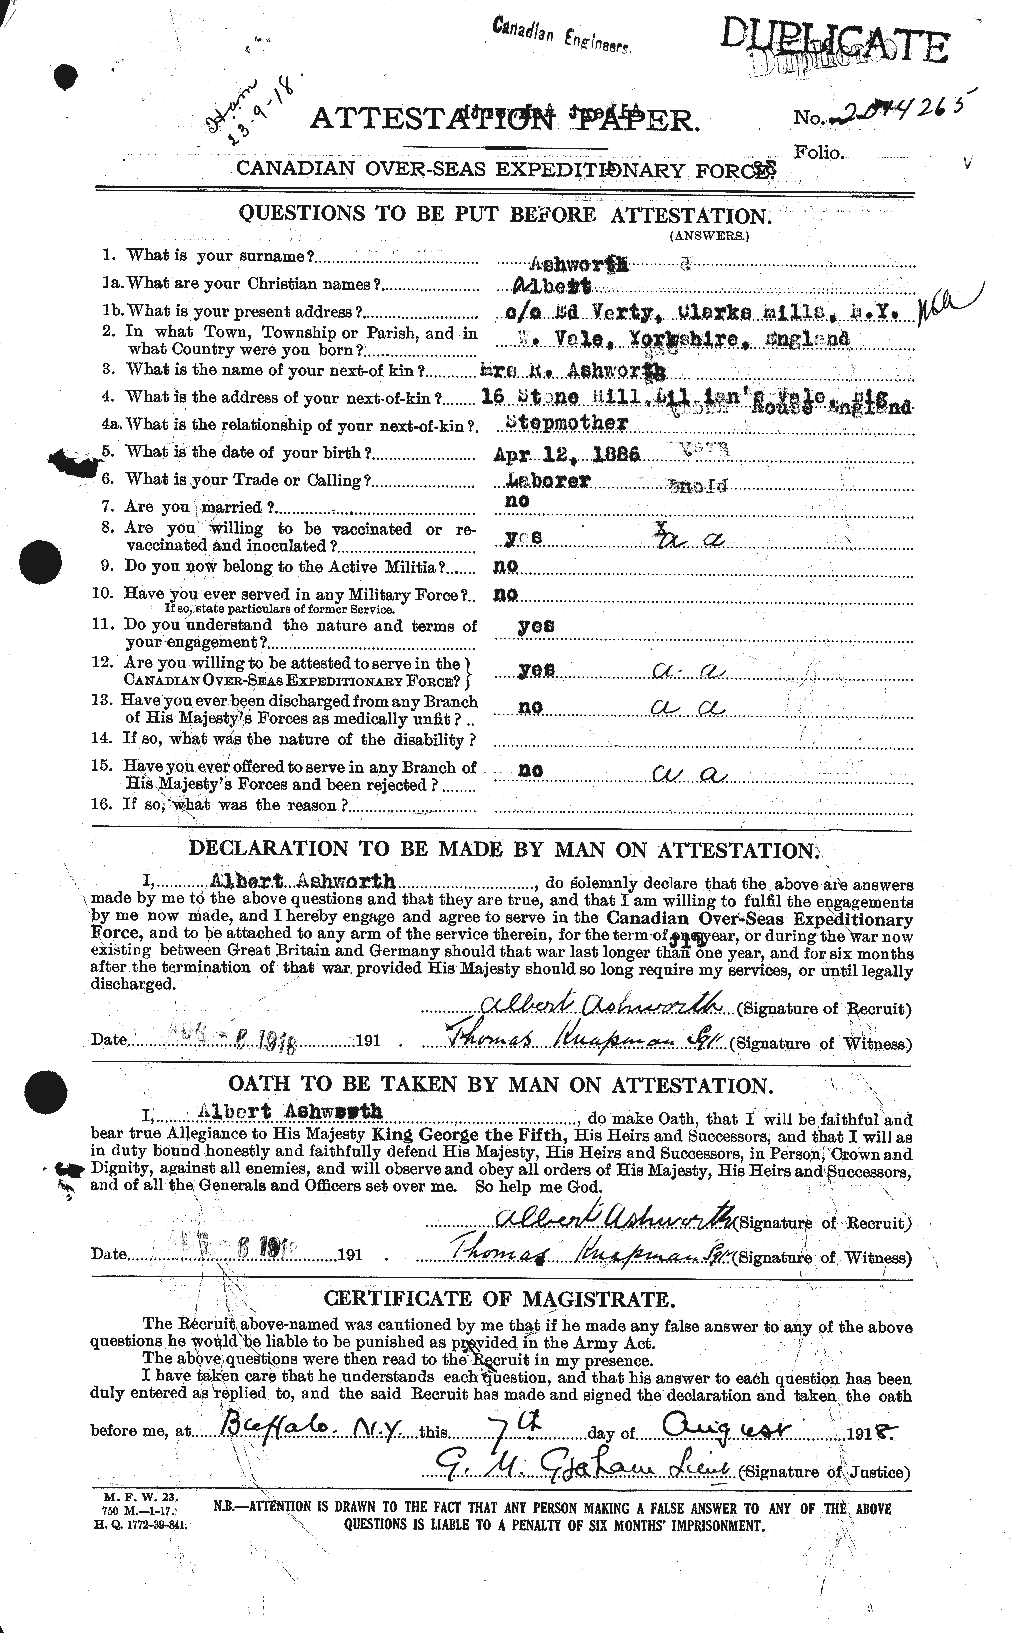 Personnel Records of the First World War - CEF 223748a